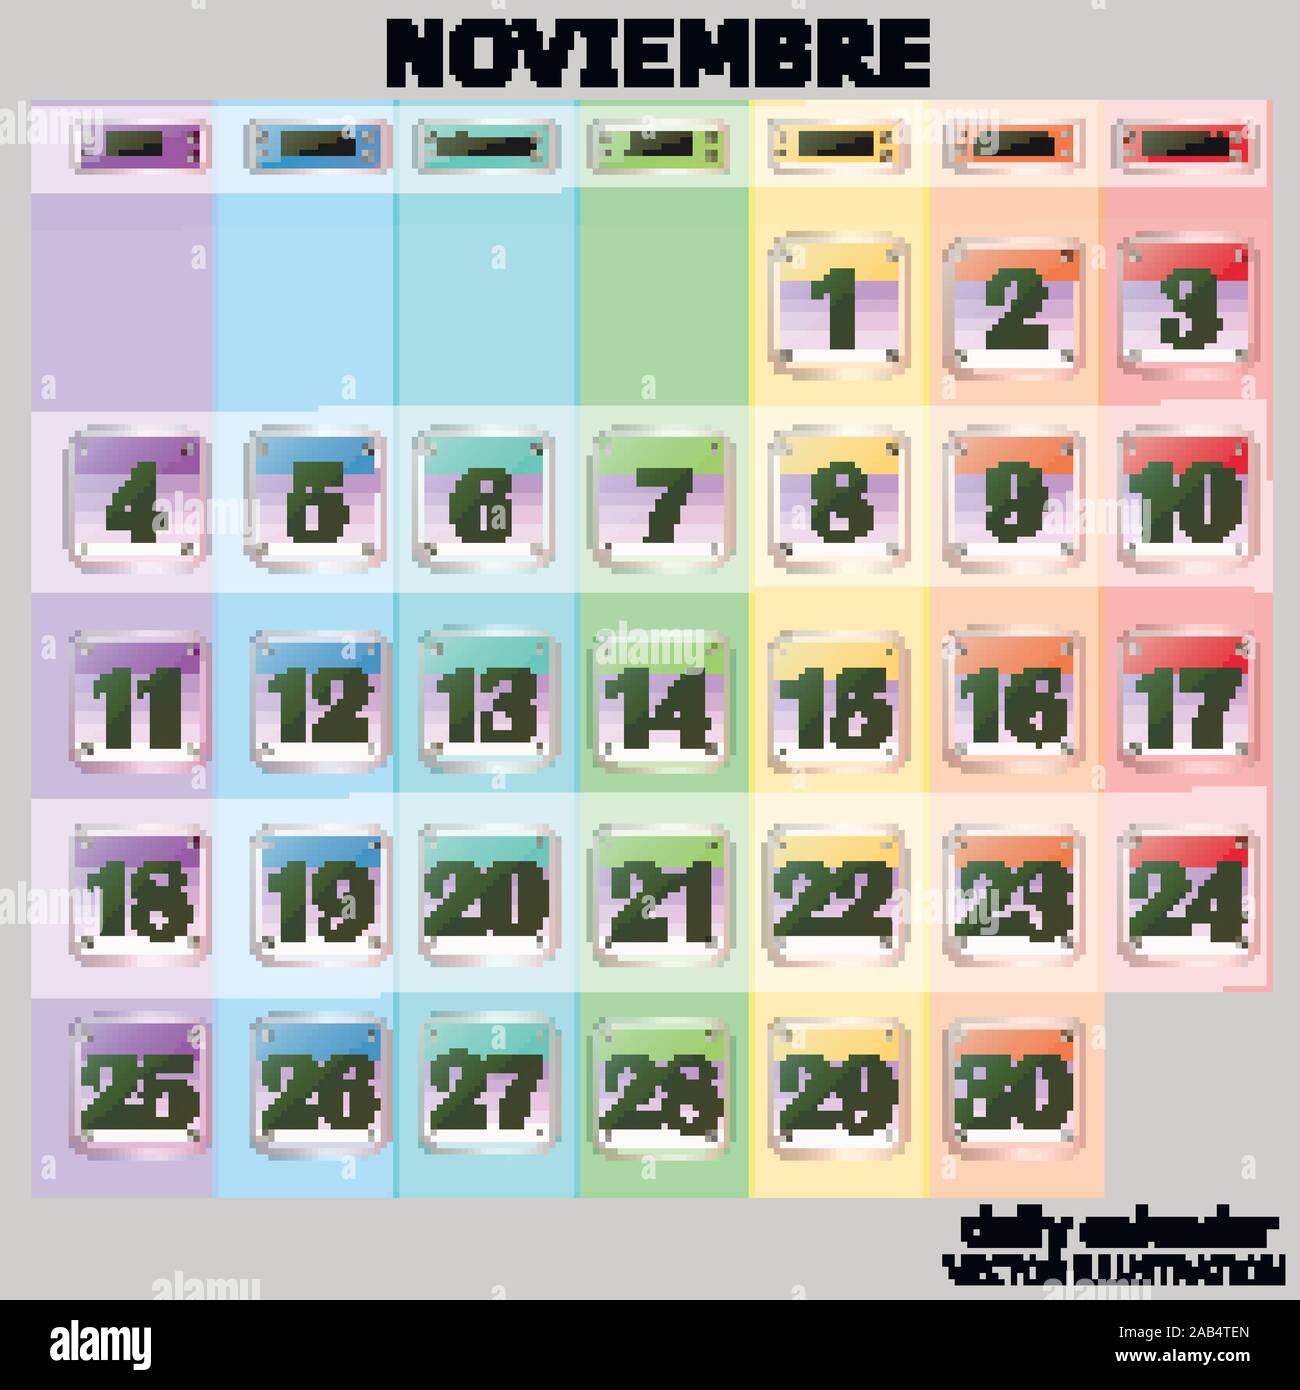 Colorful calendar for November 2019 in spanish. Set of buttons with calendar dates for the month of November. For planning important days. Banners for holidays and special days. Vector illustration. Stock Vector